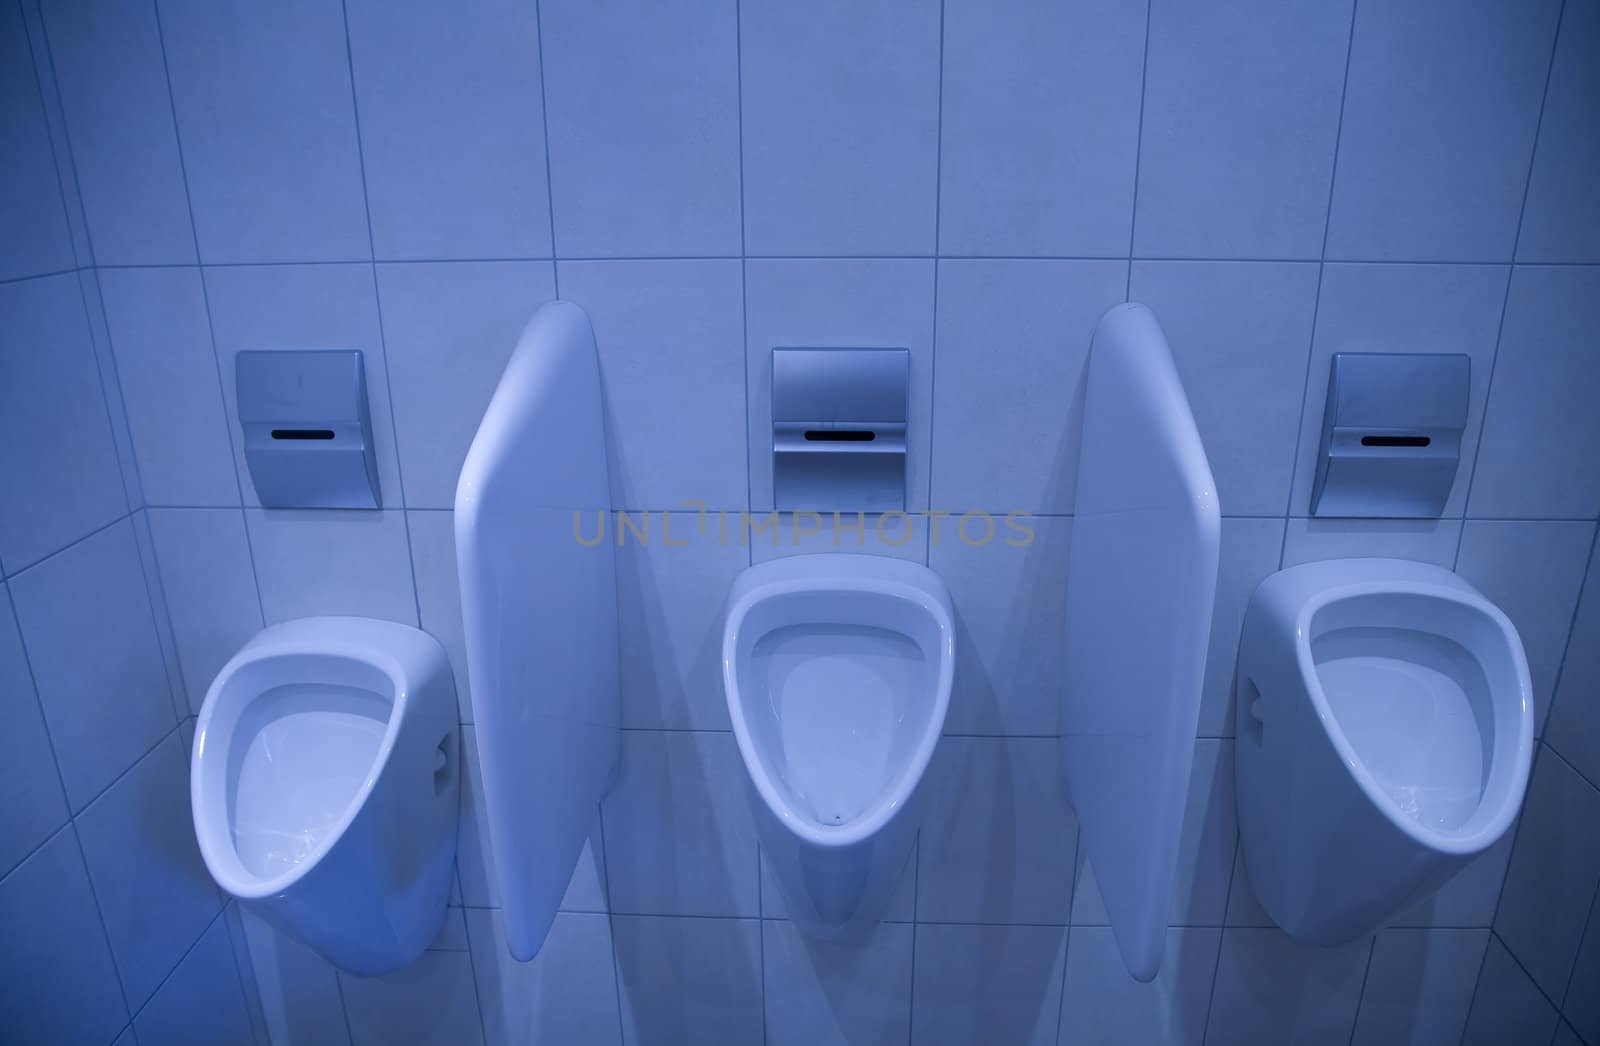 Three nice and clean urinals in a row.